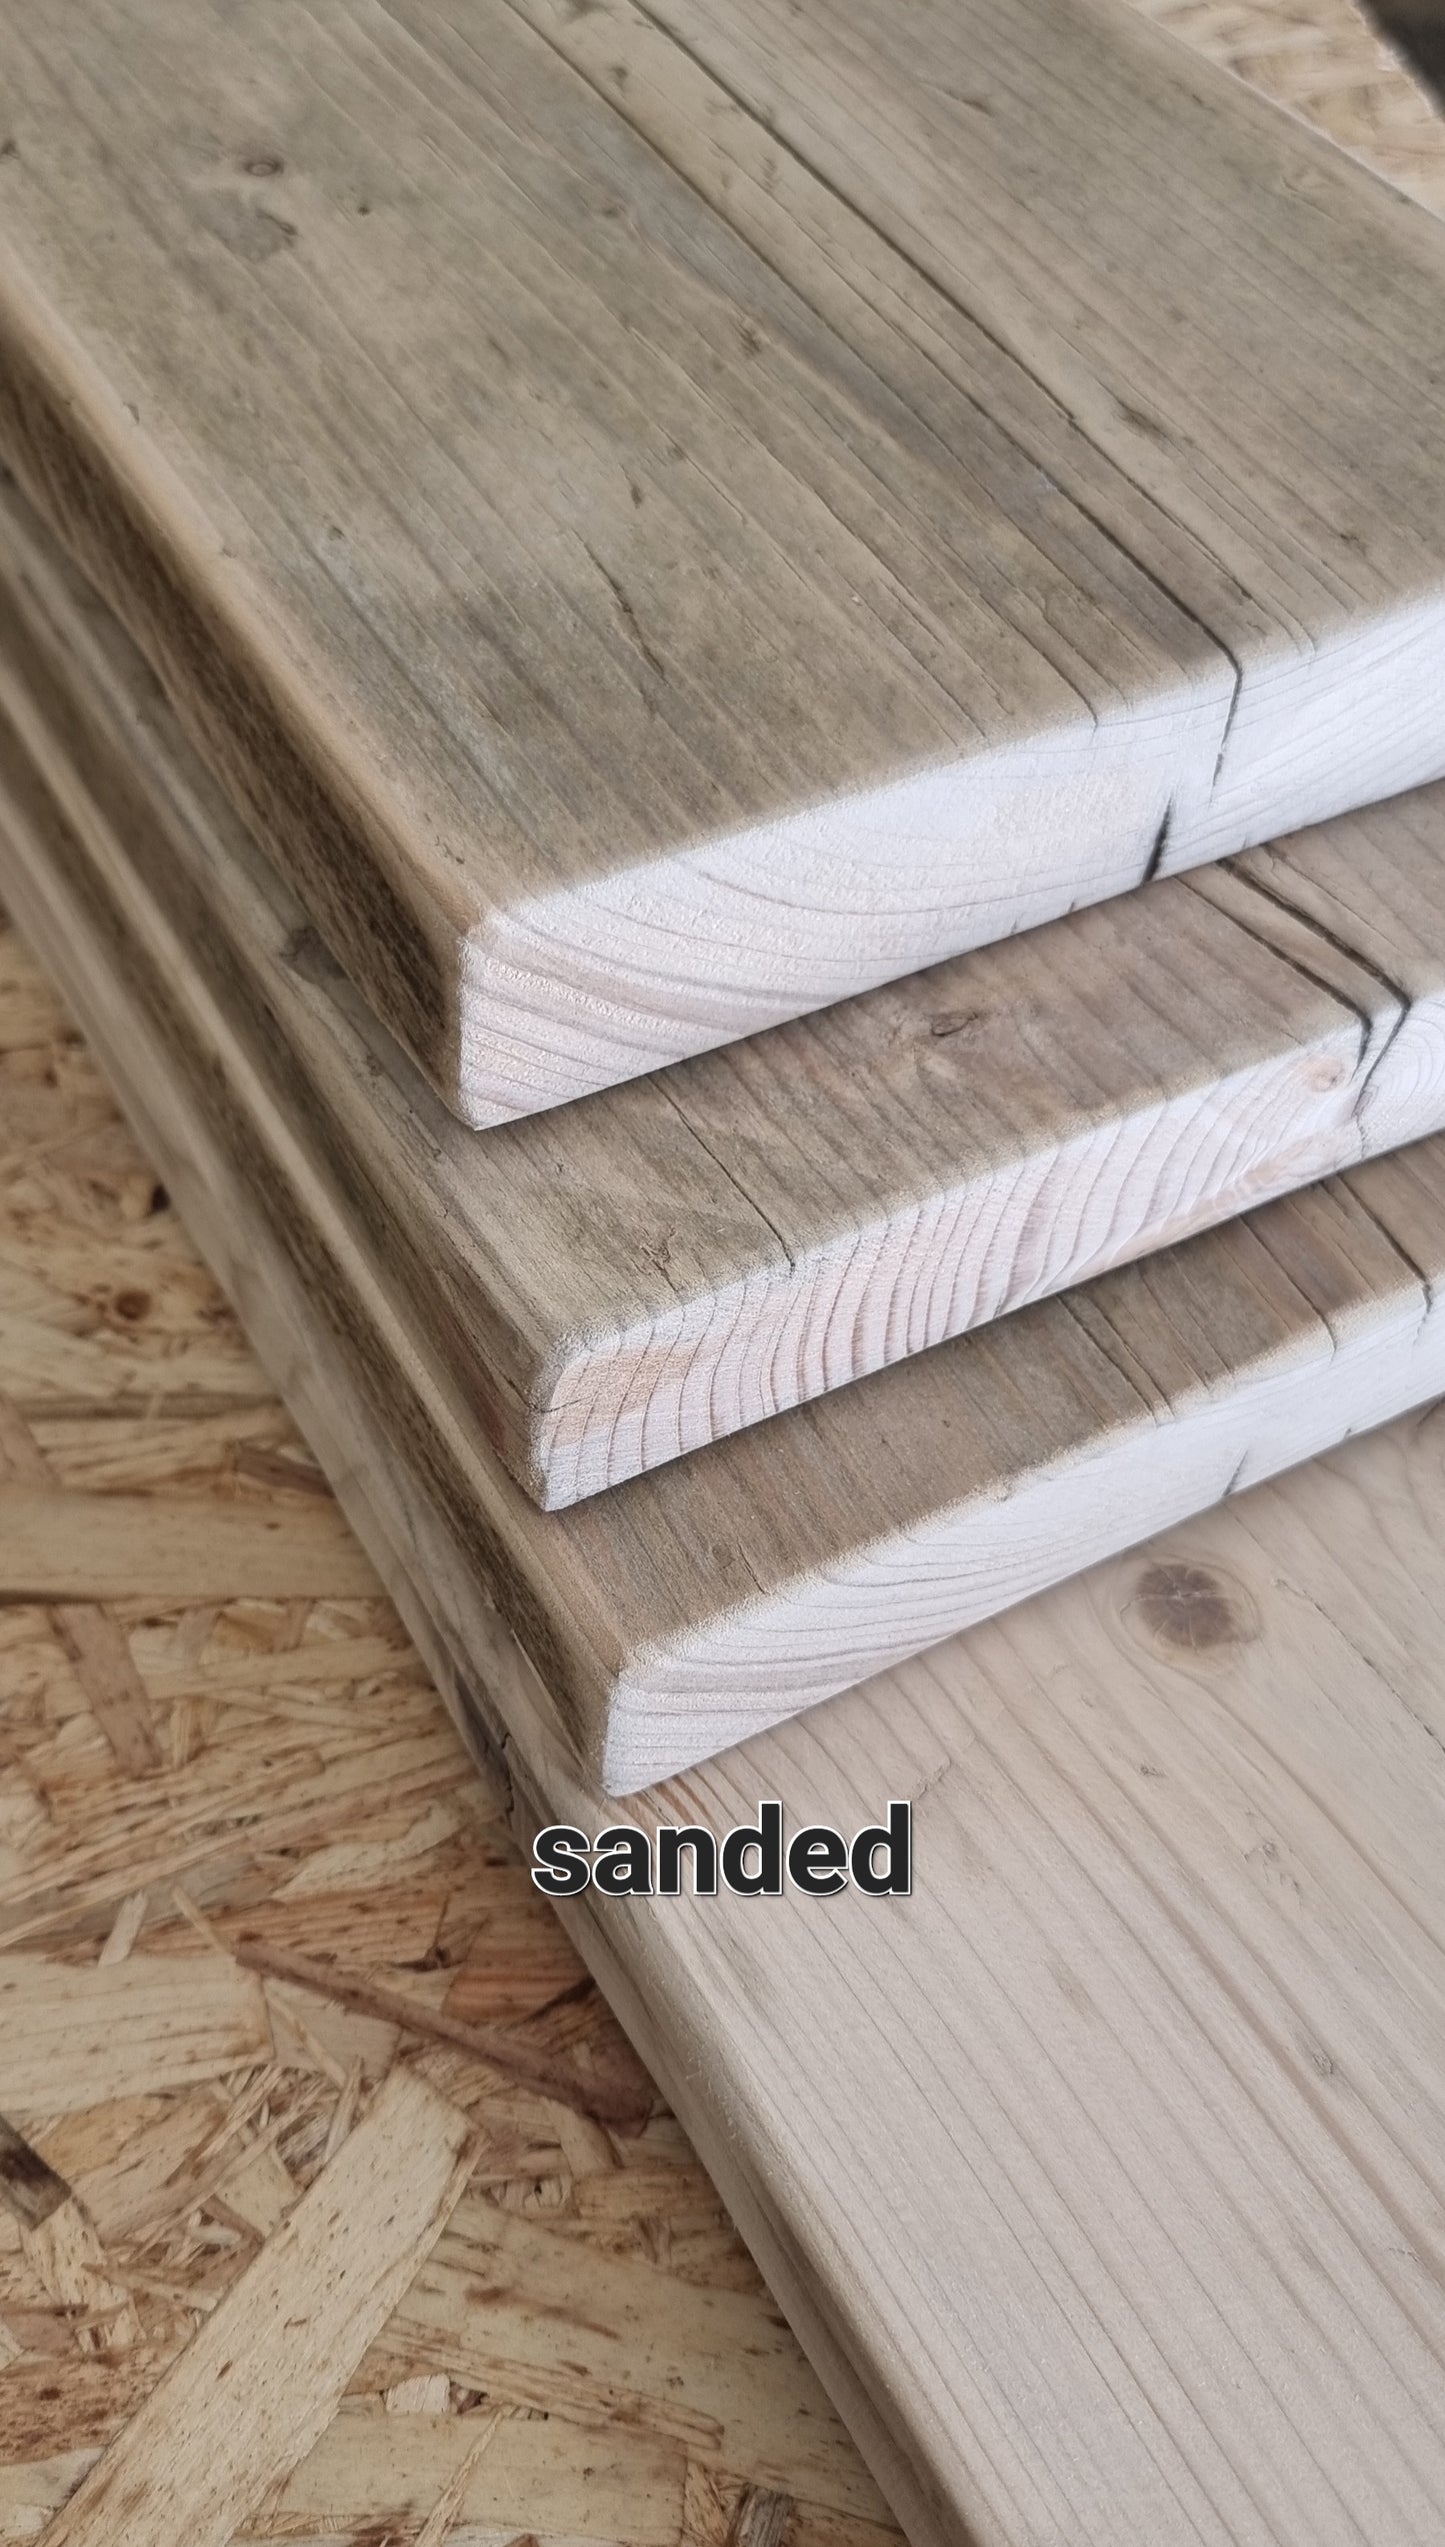 Sanded scaffold boards. Cut to size